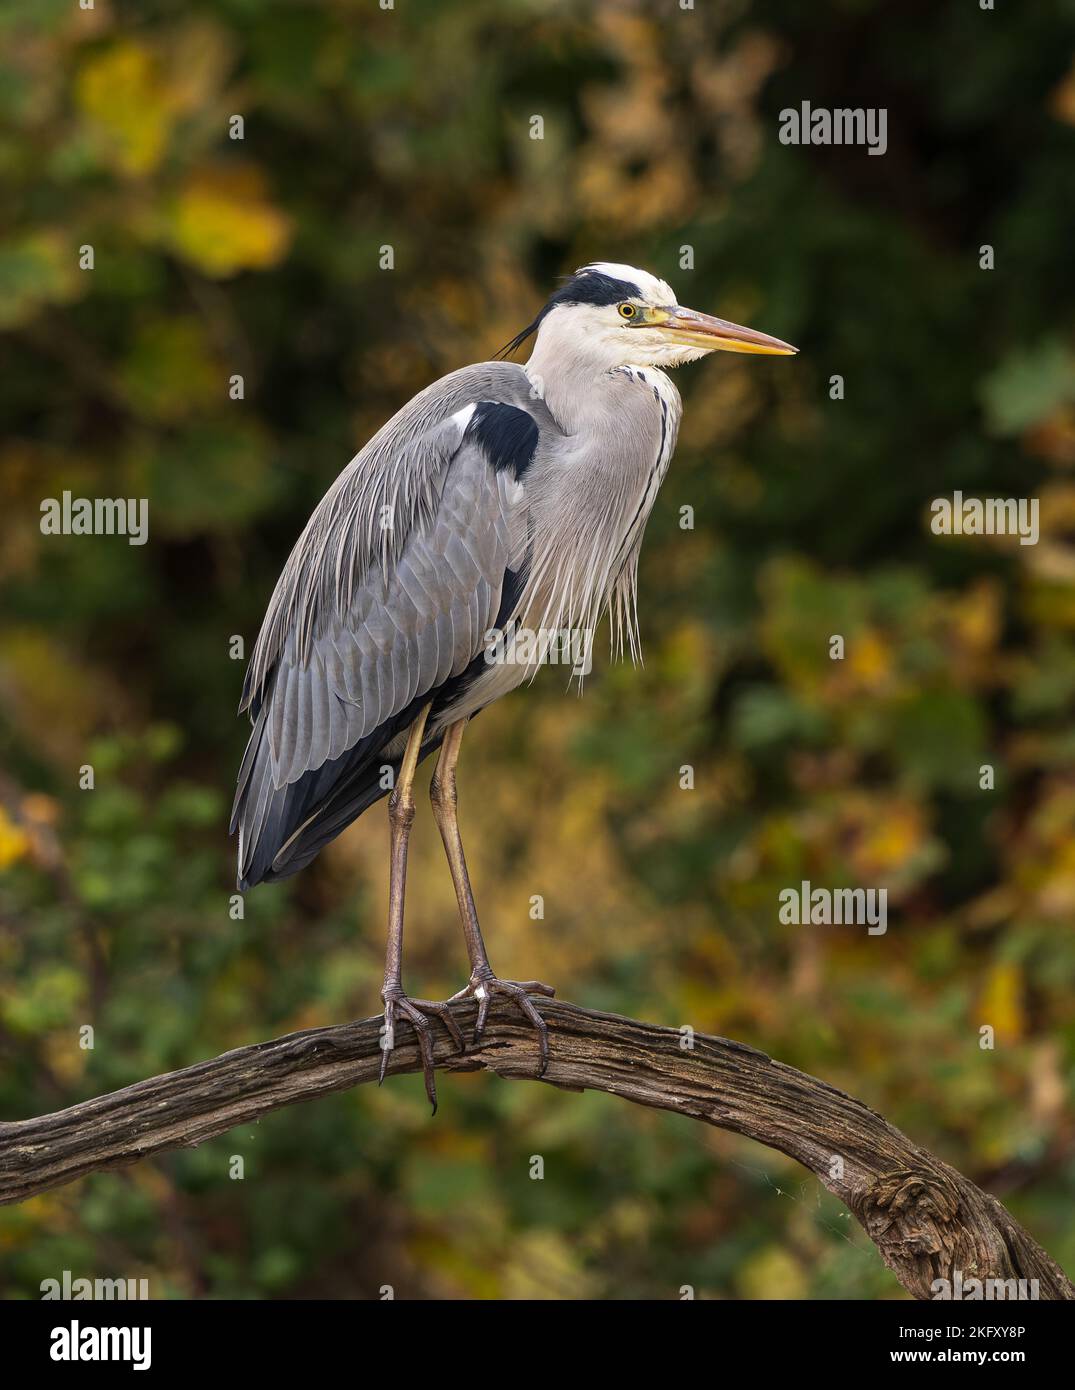 Wild Heron resting on a branch Stock Photo